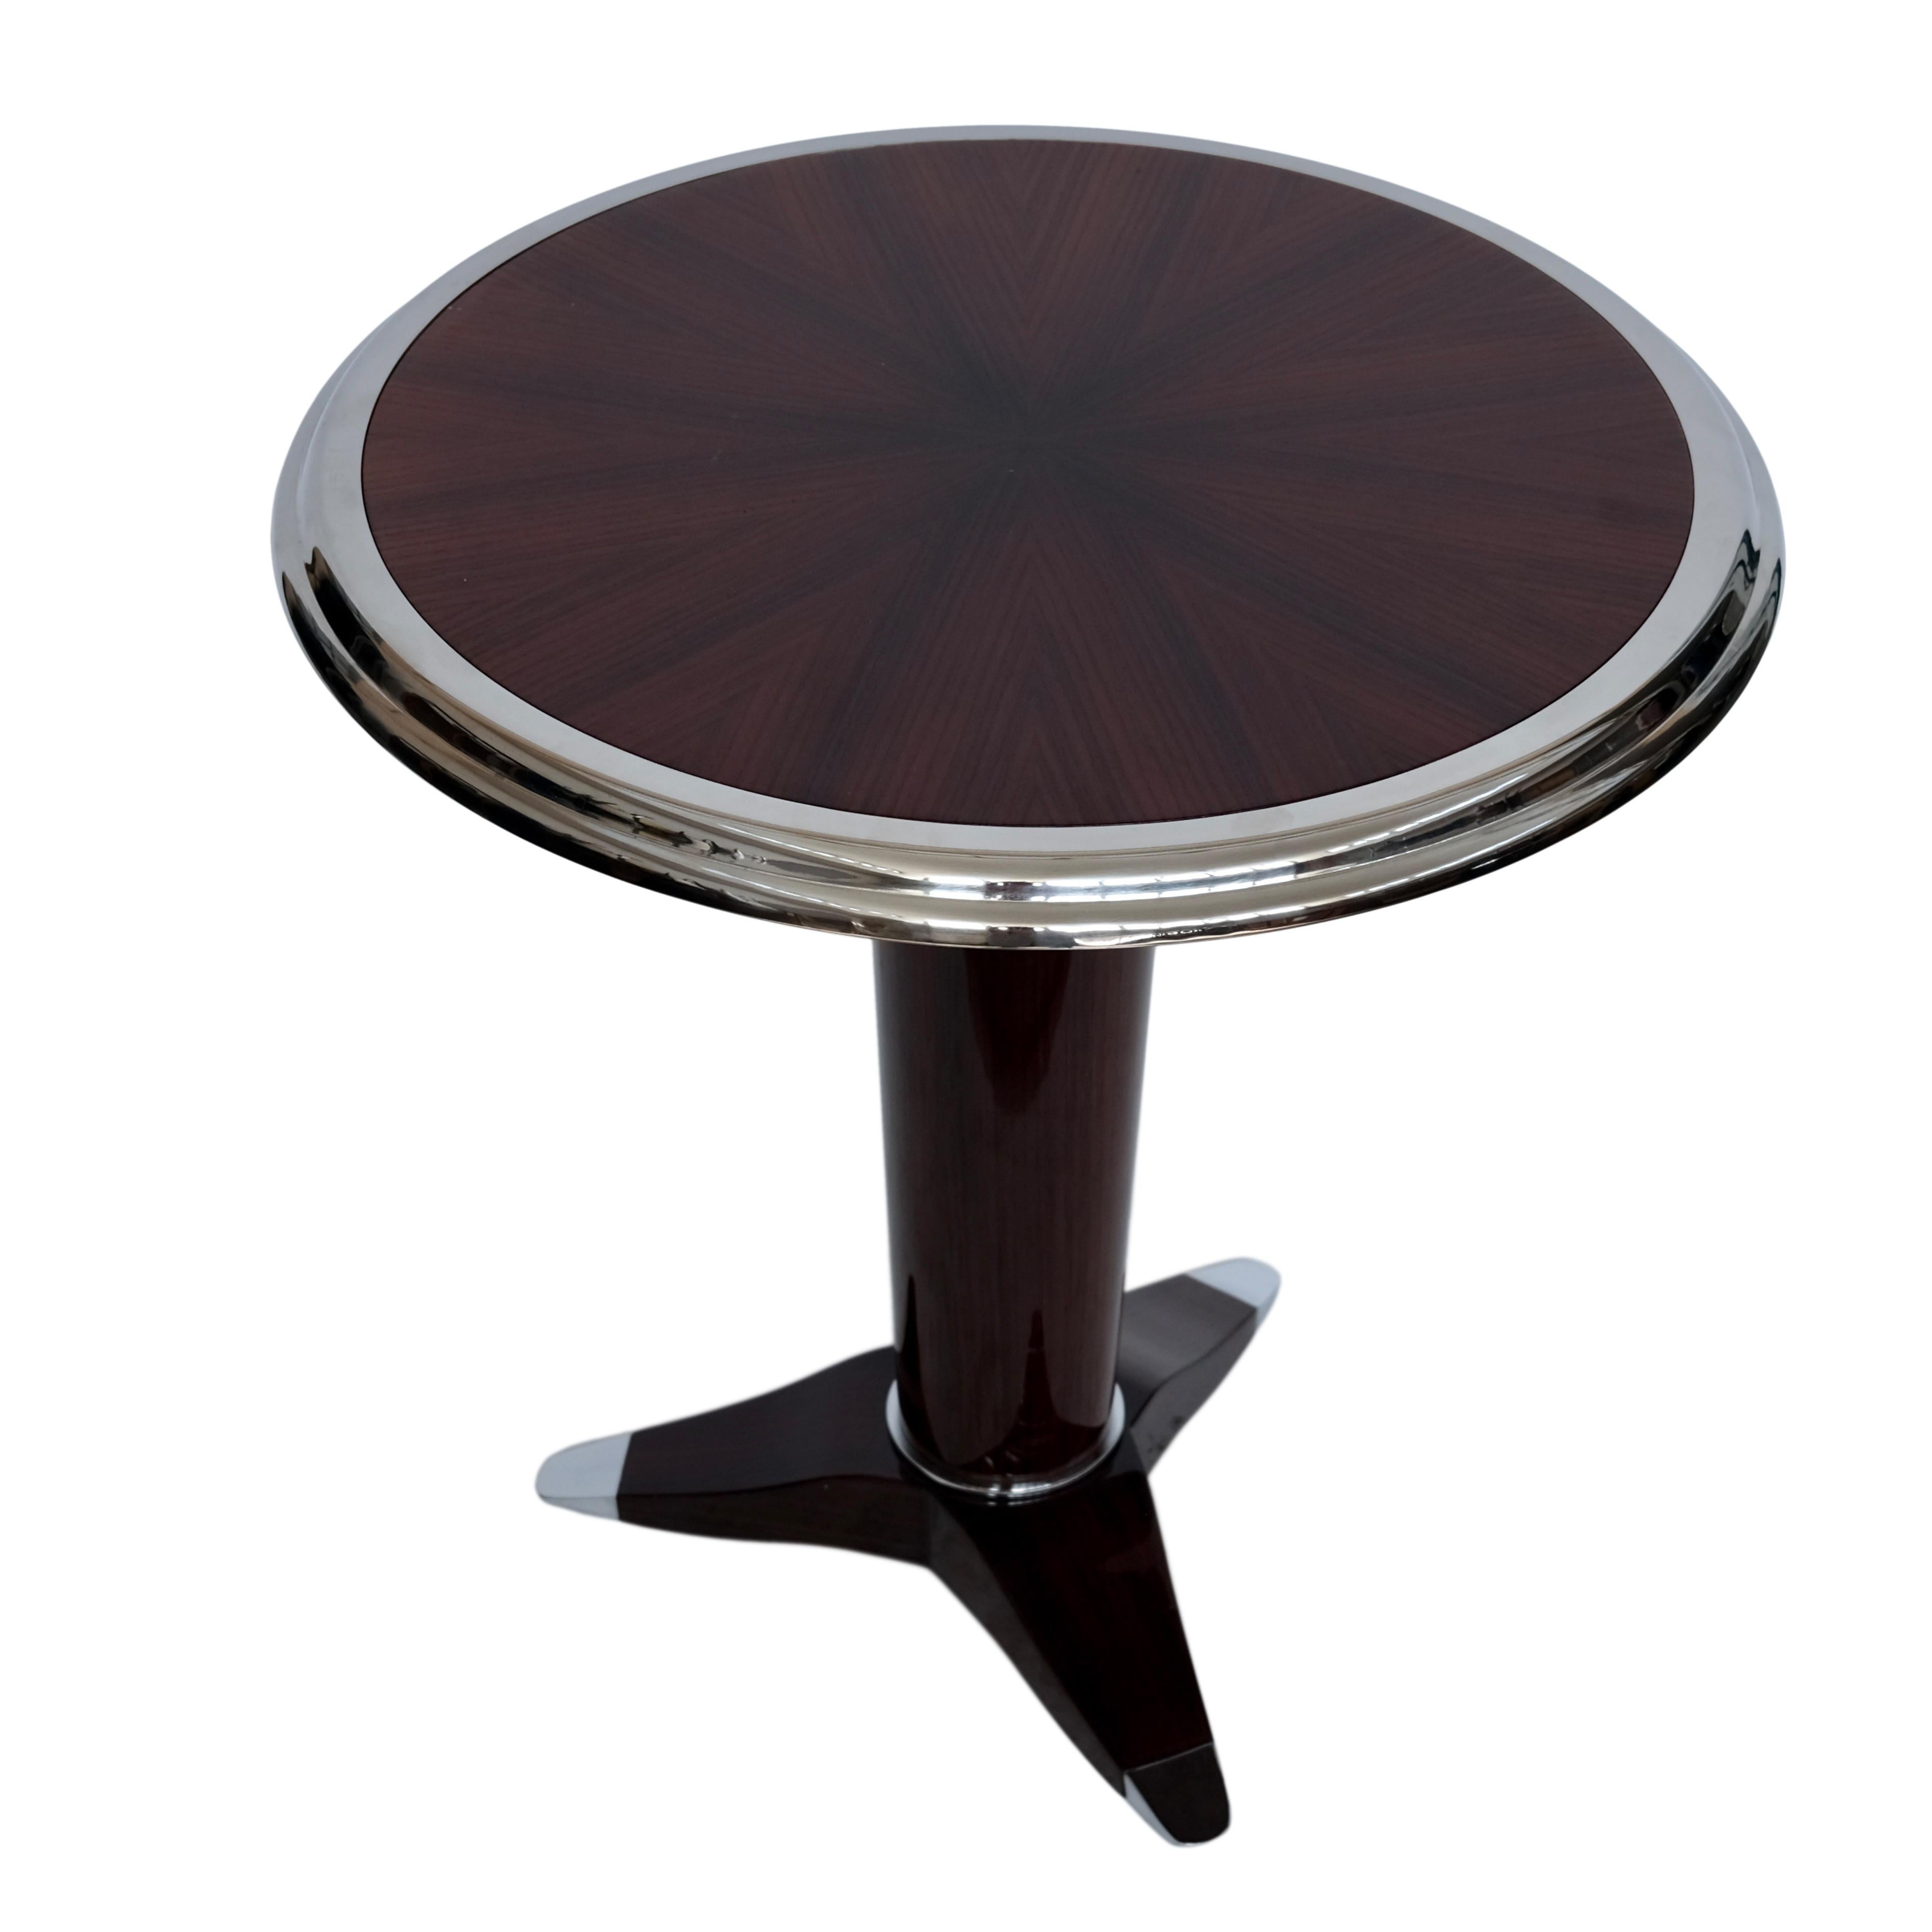 French Round Art Deco Style Side Table in Lacquered Mahogany and Chrome For Sale